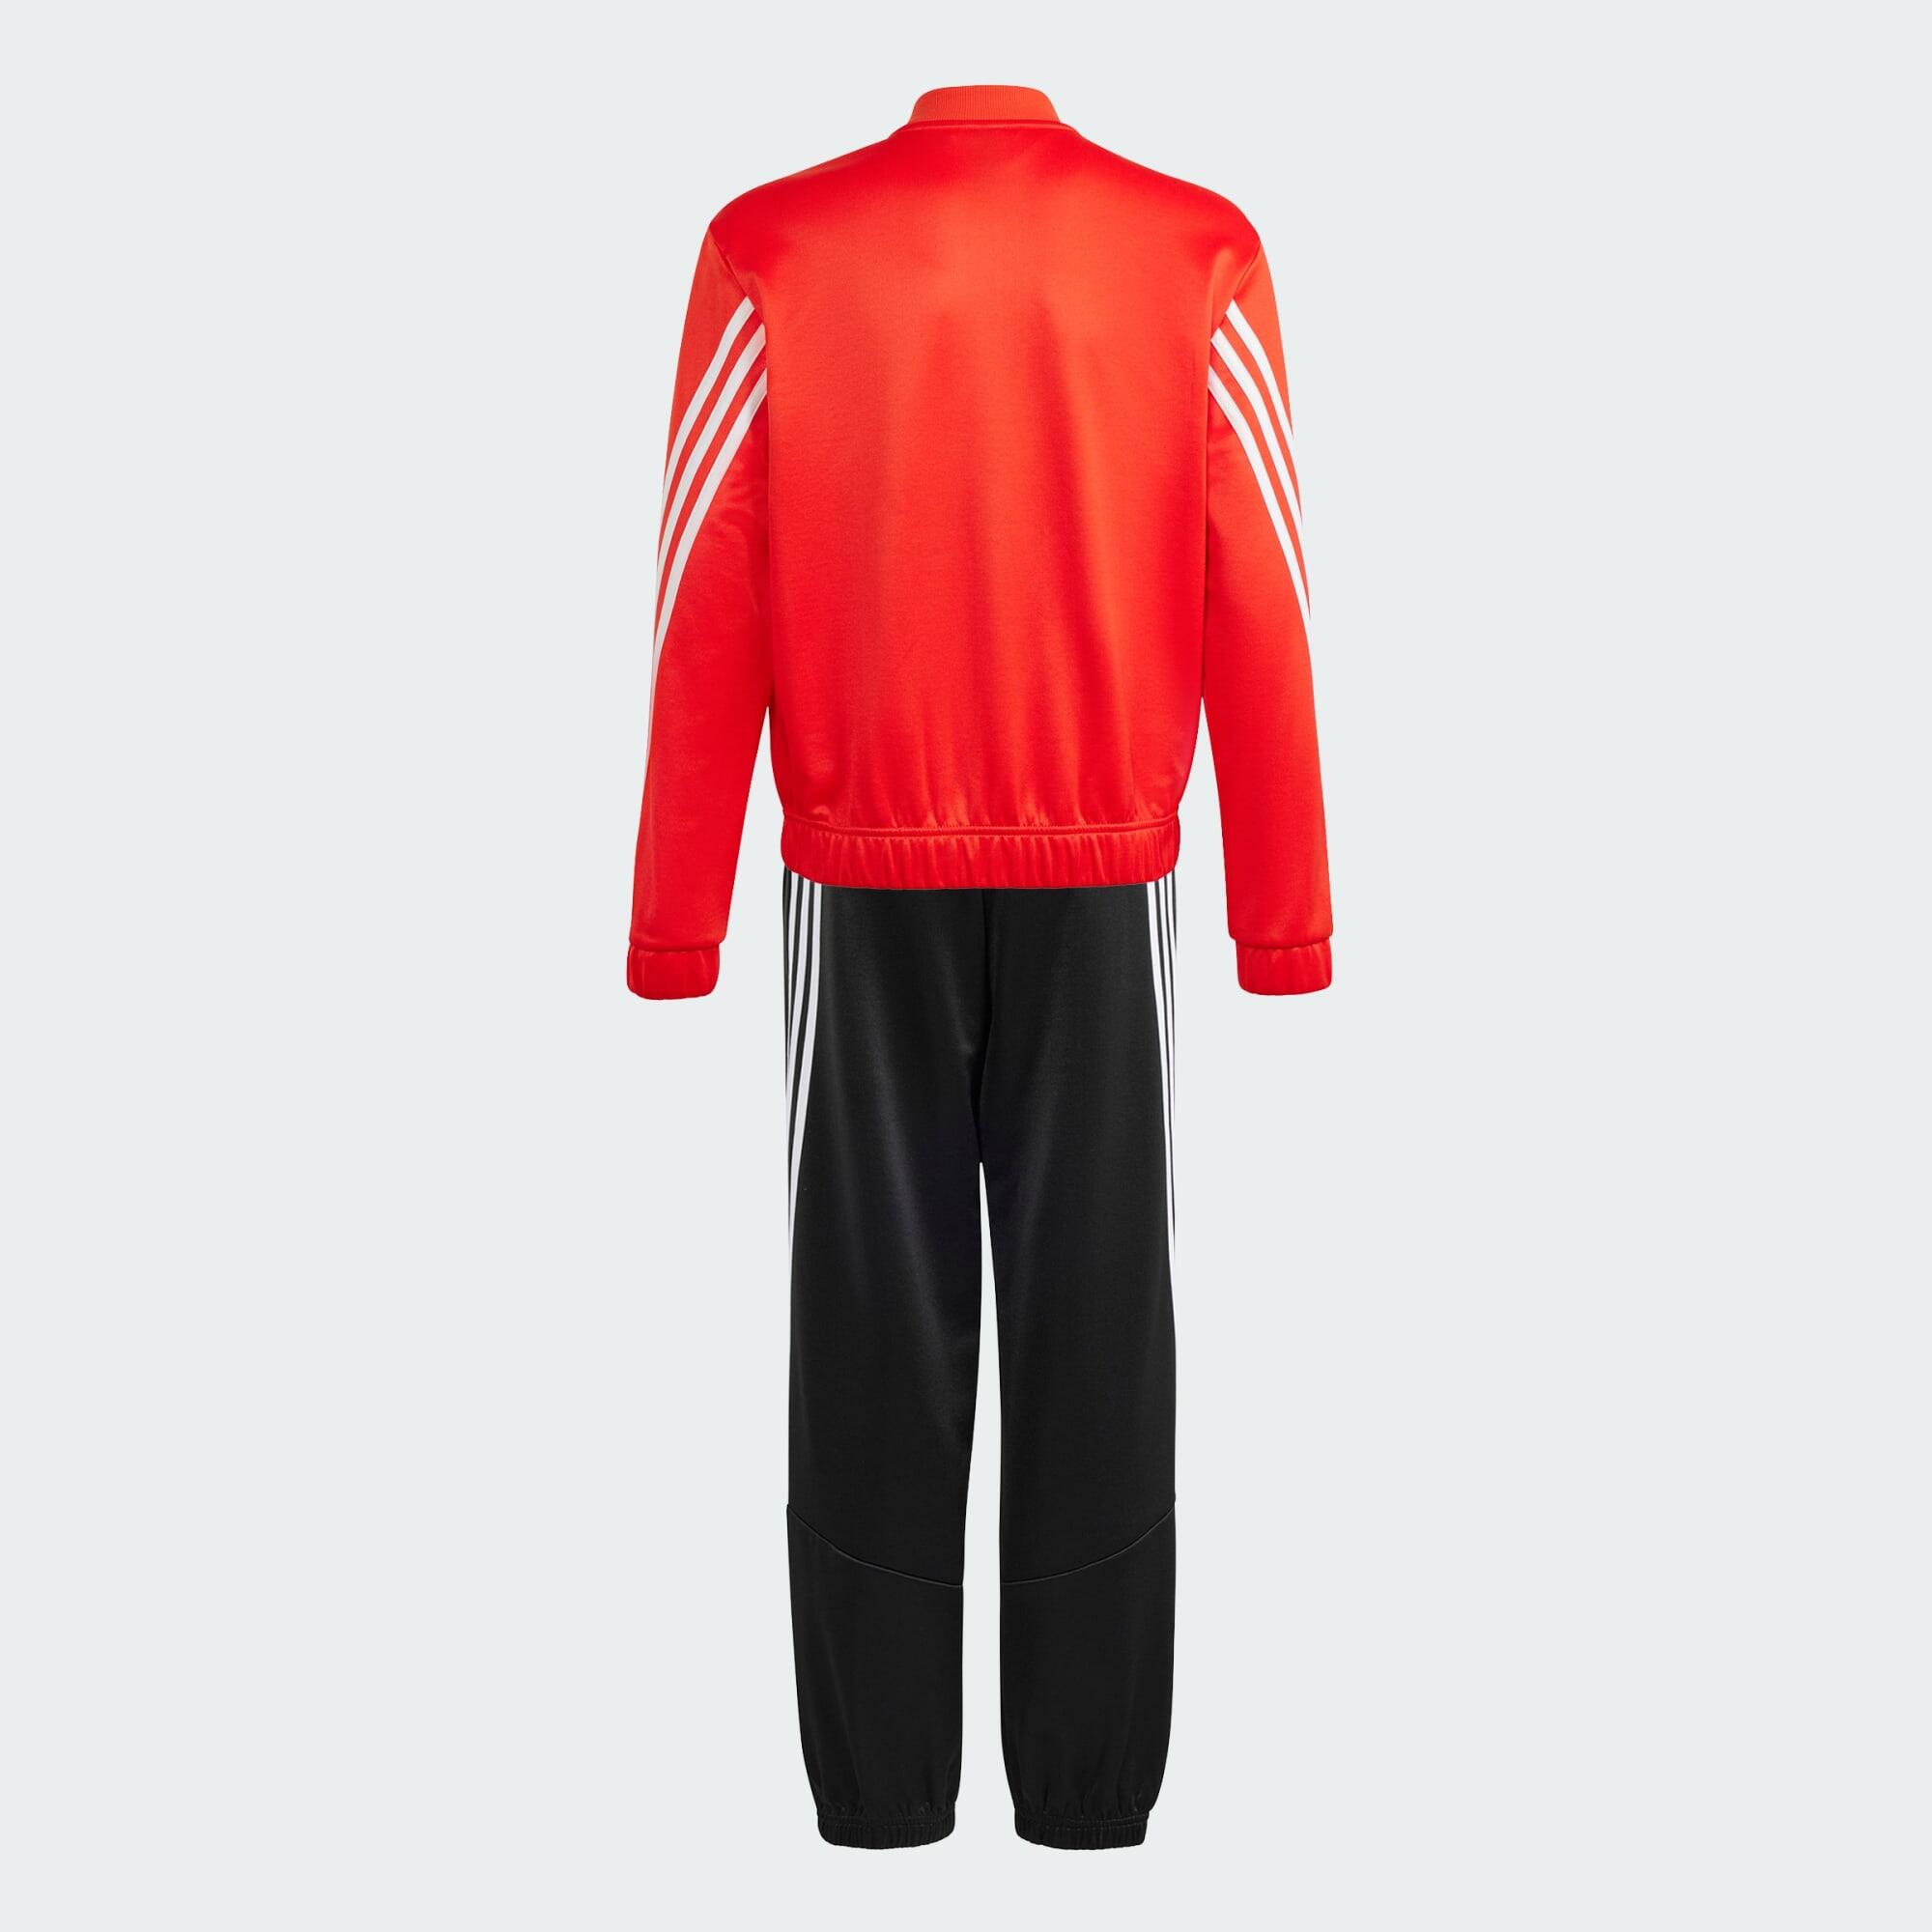 Future Icons 3-Stripes Track Suit 4/5